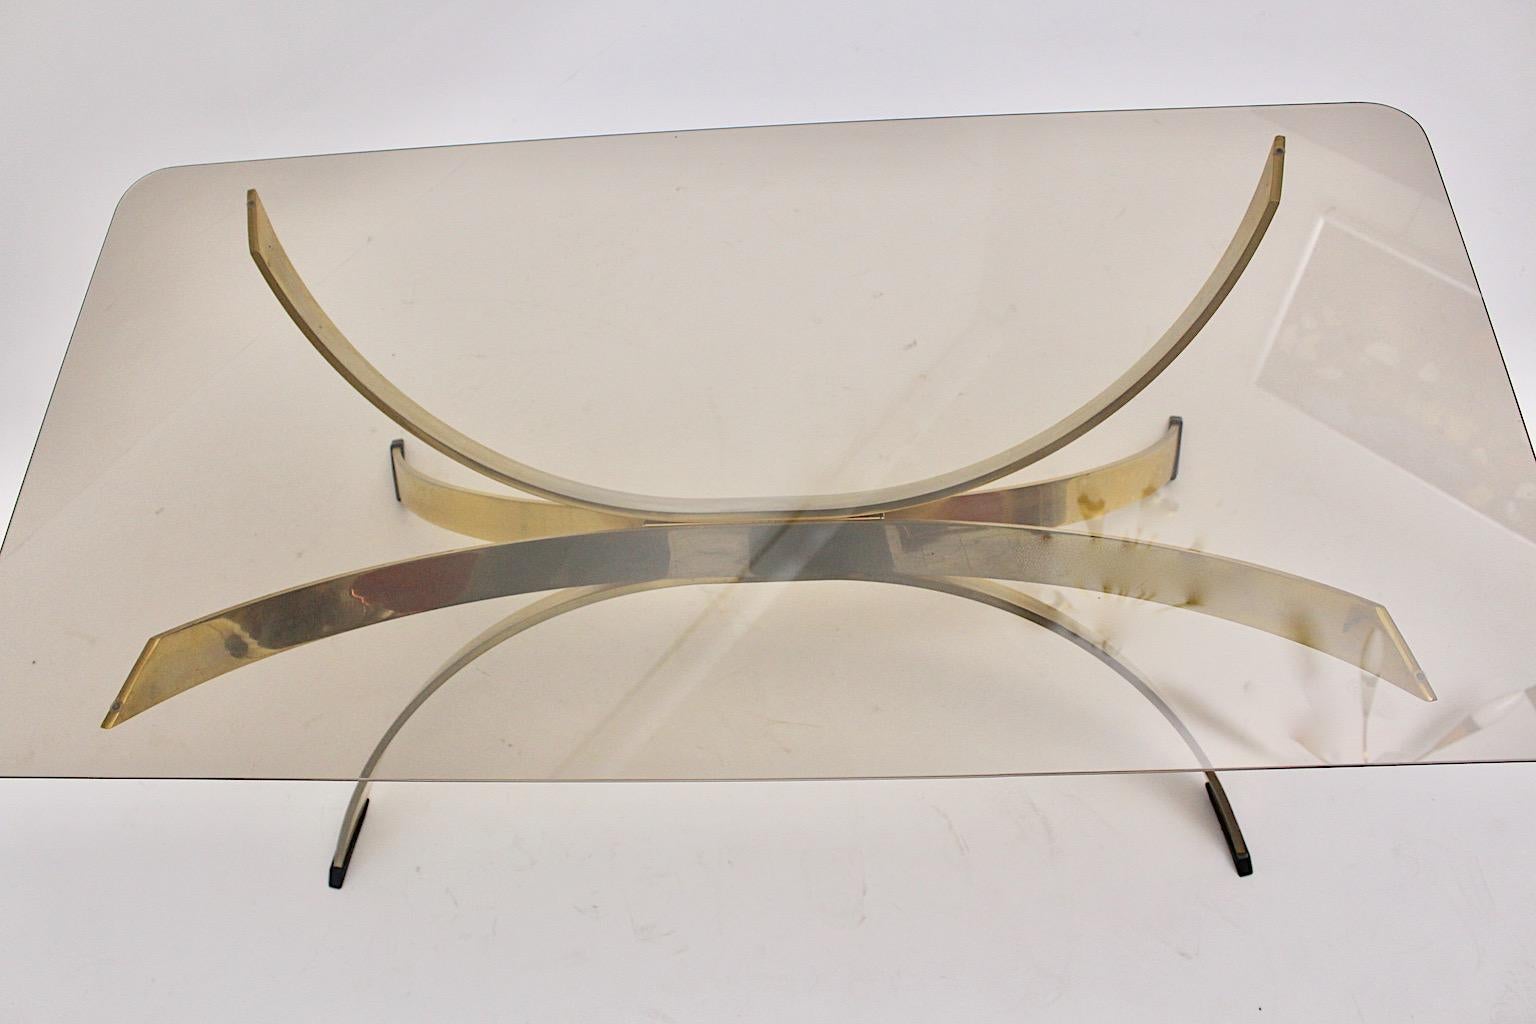 Brassed Metal Smoked Glass Sculptural Vintage Coffee Table Sofa Table 1970s For Sale 5